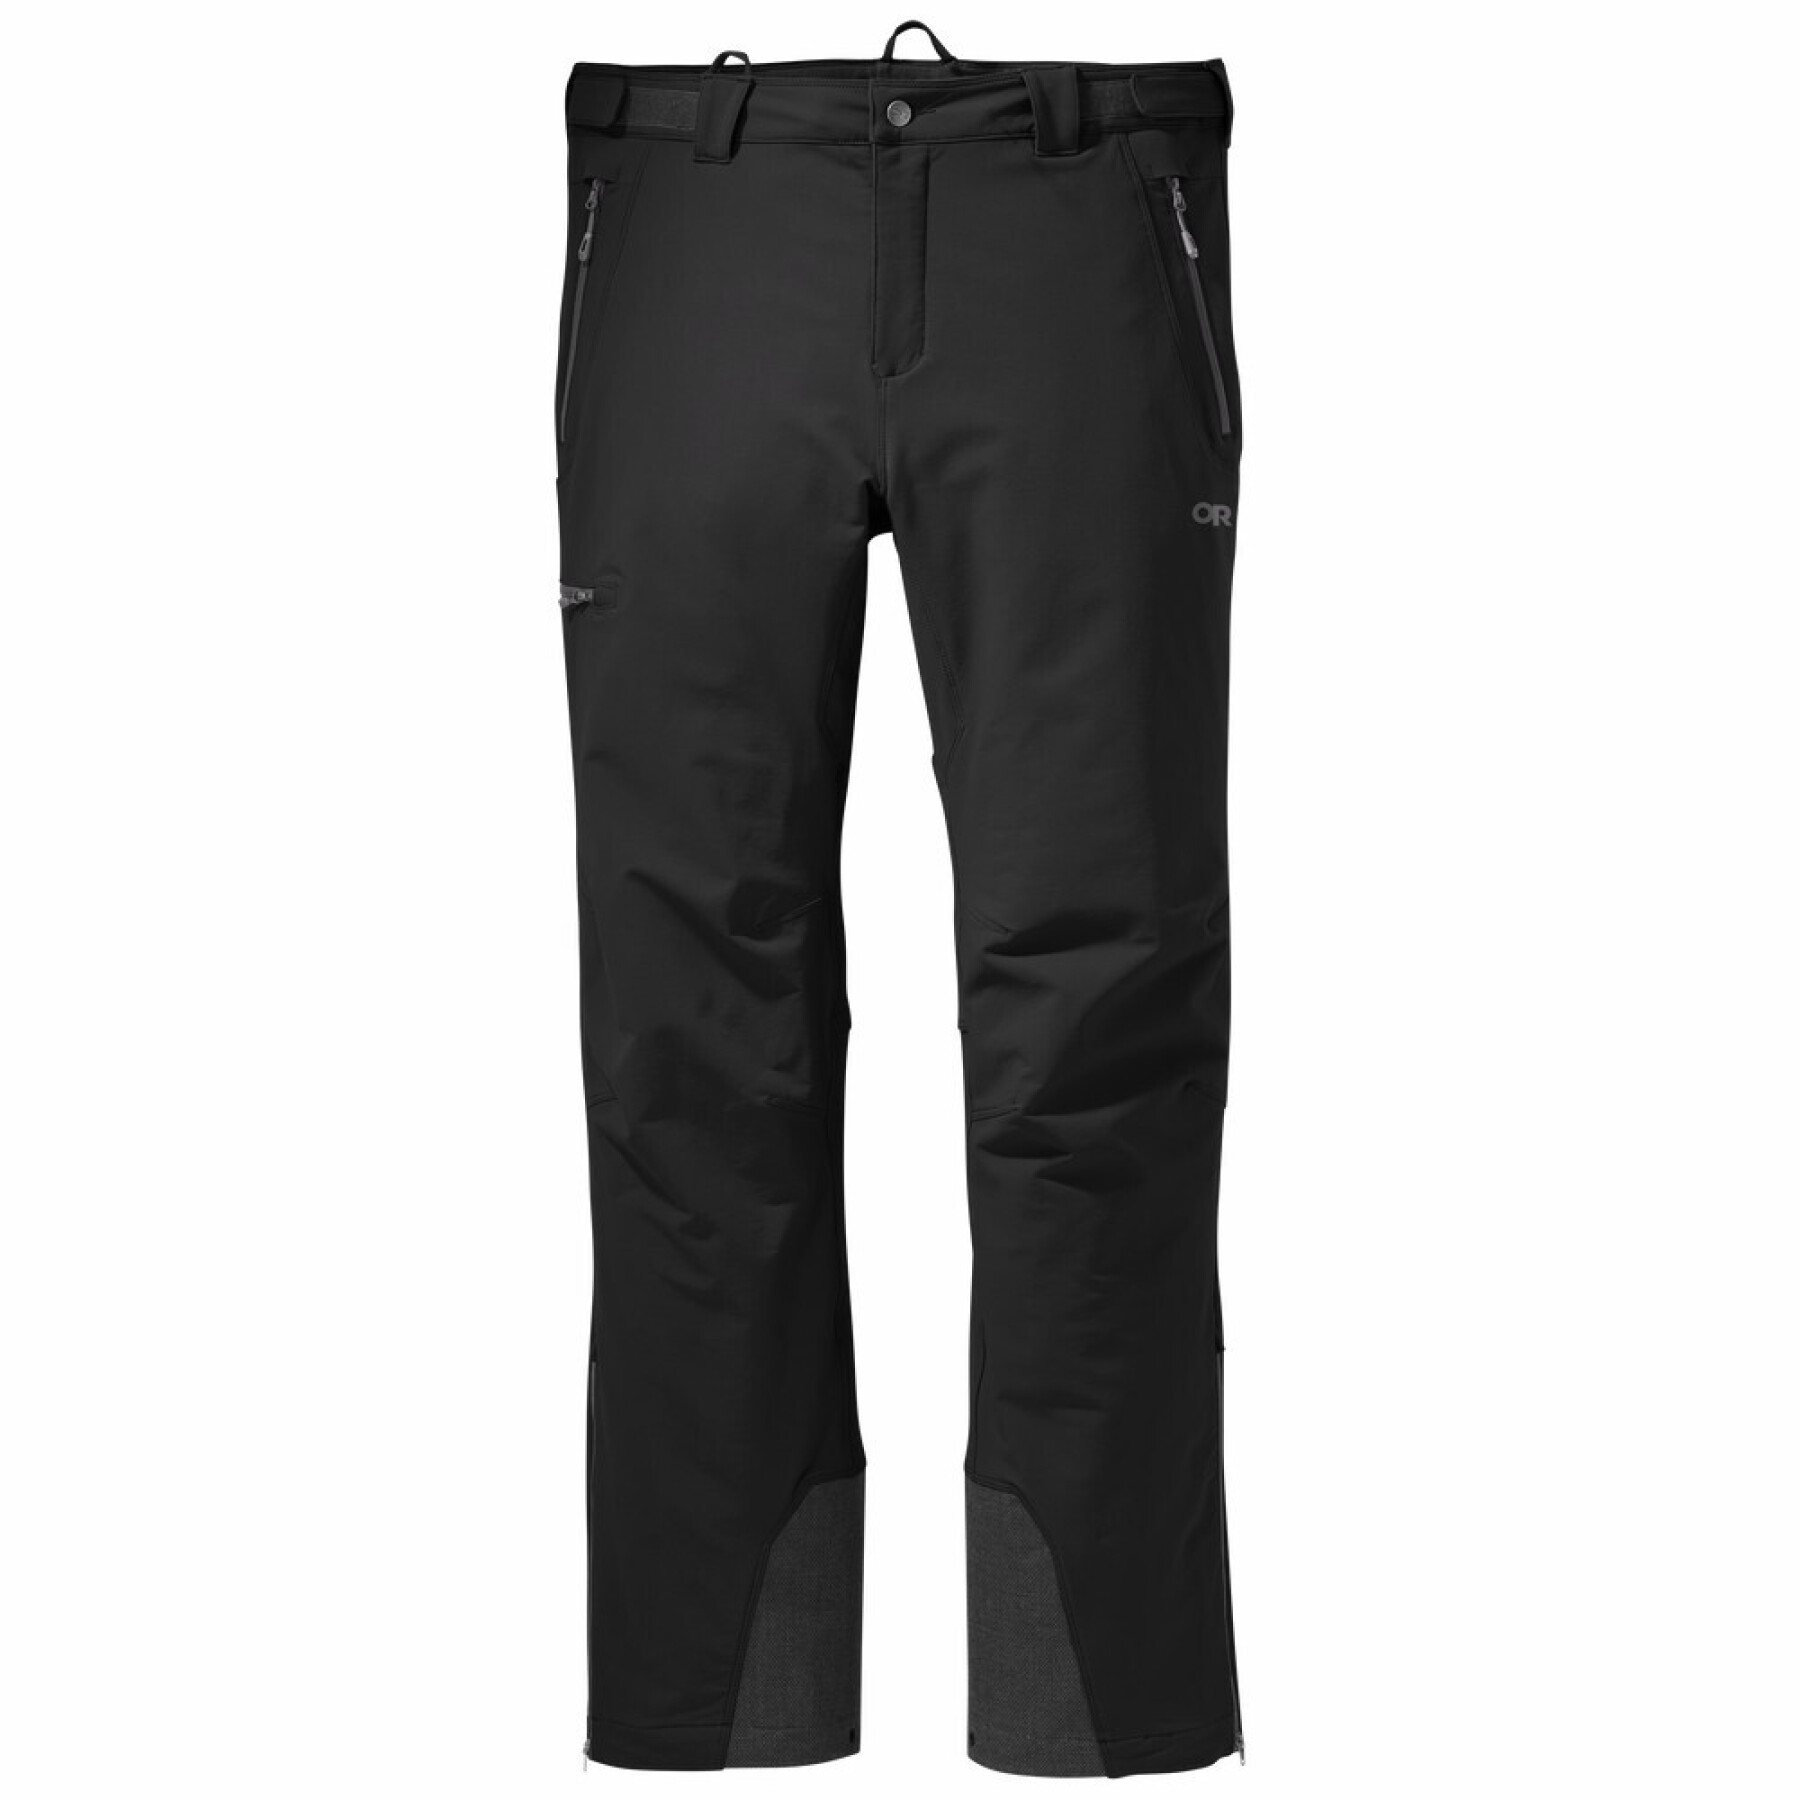 Skihose Outdoor Research Cirque II